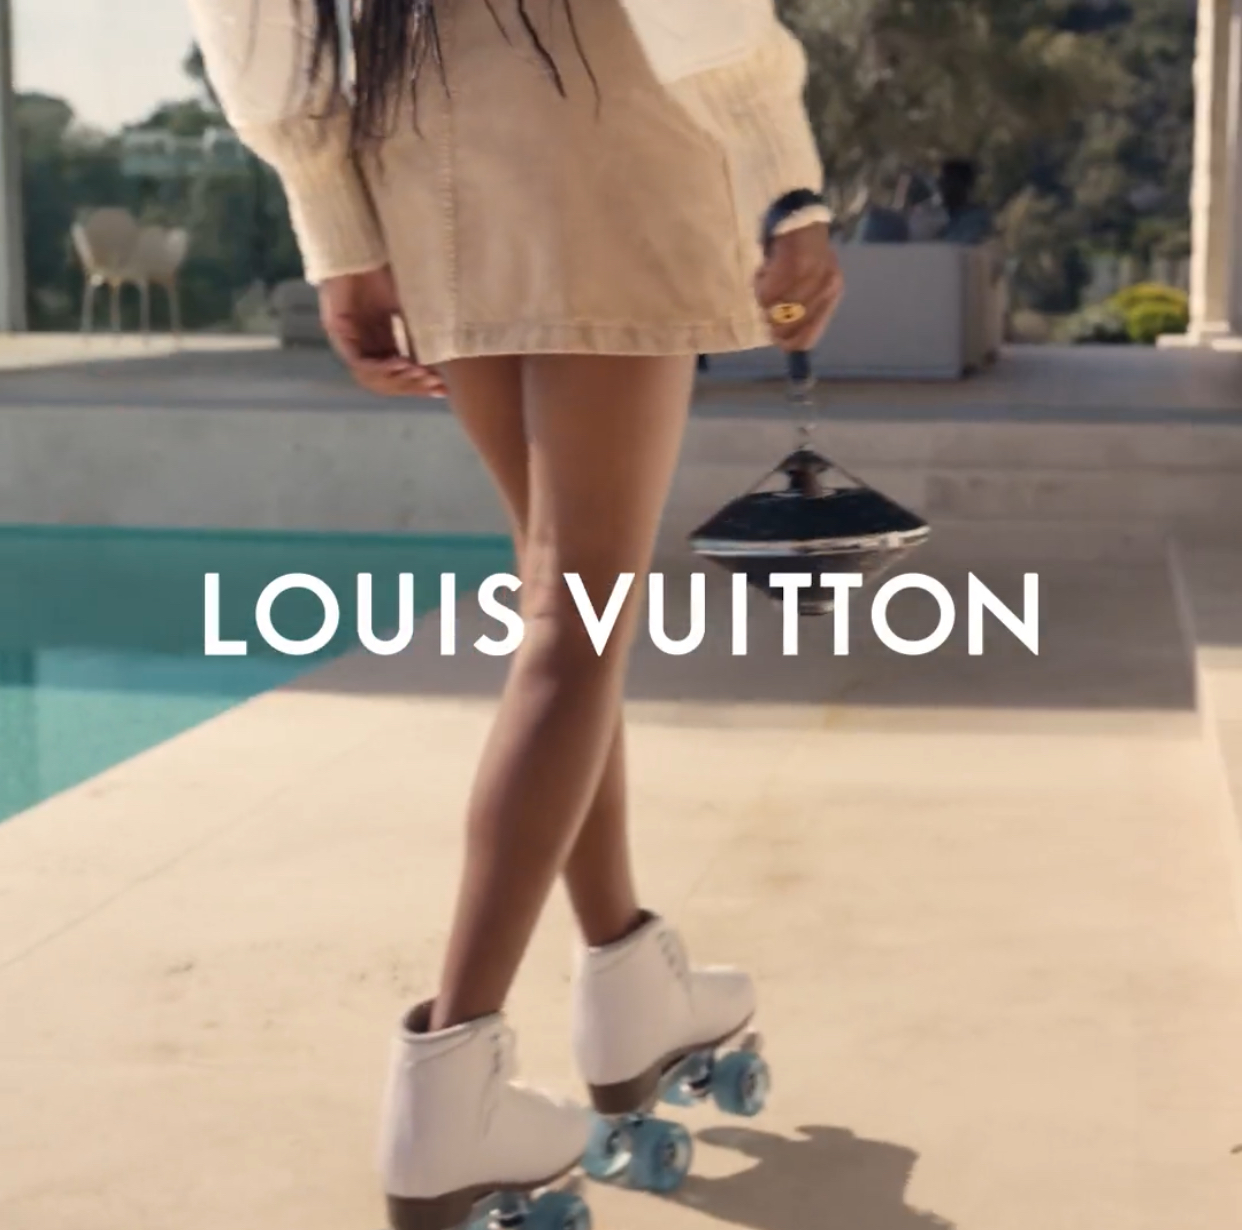 Louis Vuitton: 5 Things To Know About The Horizon Light Up Speaker